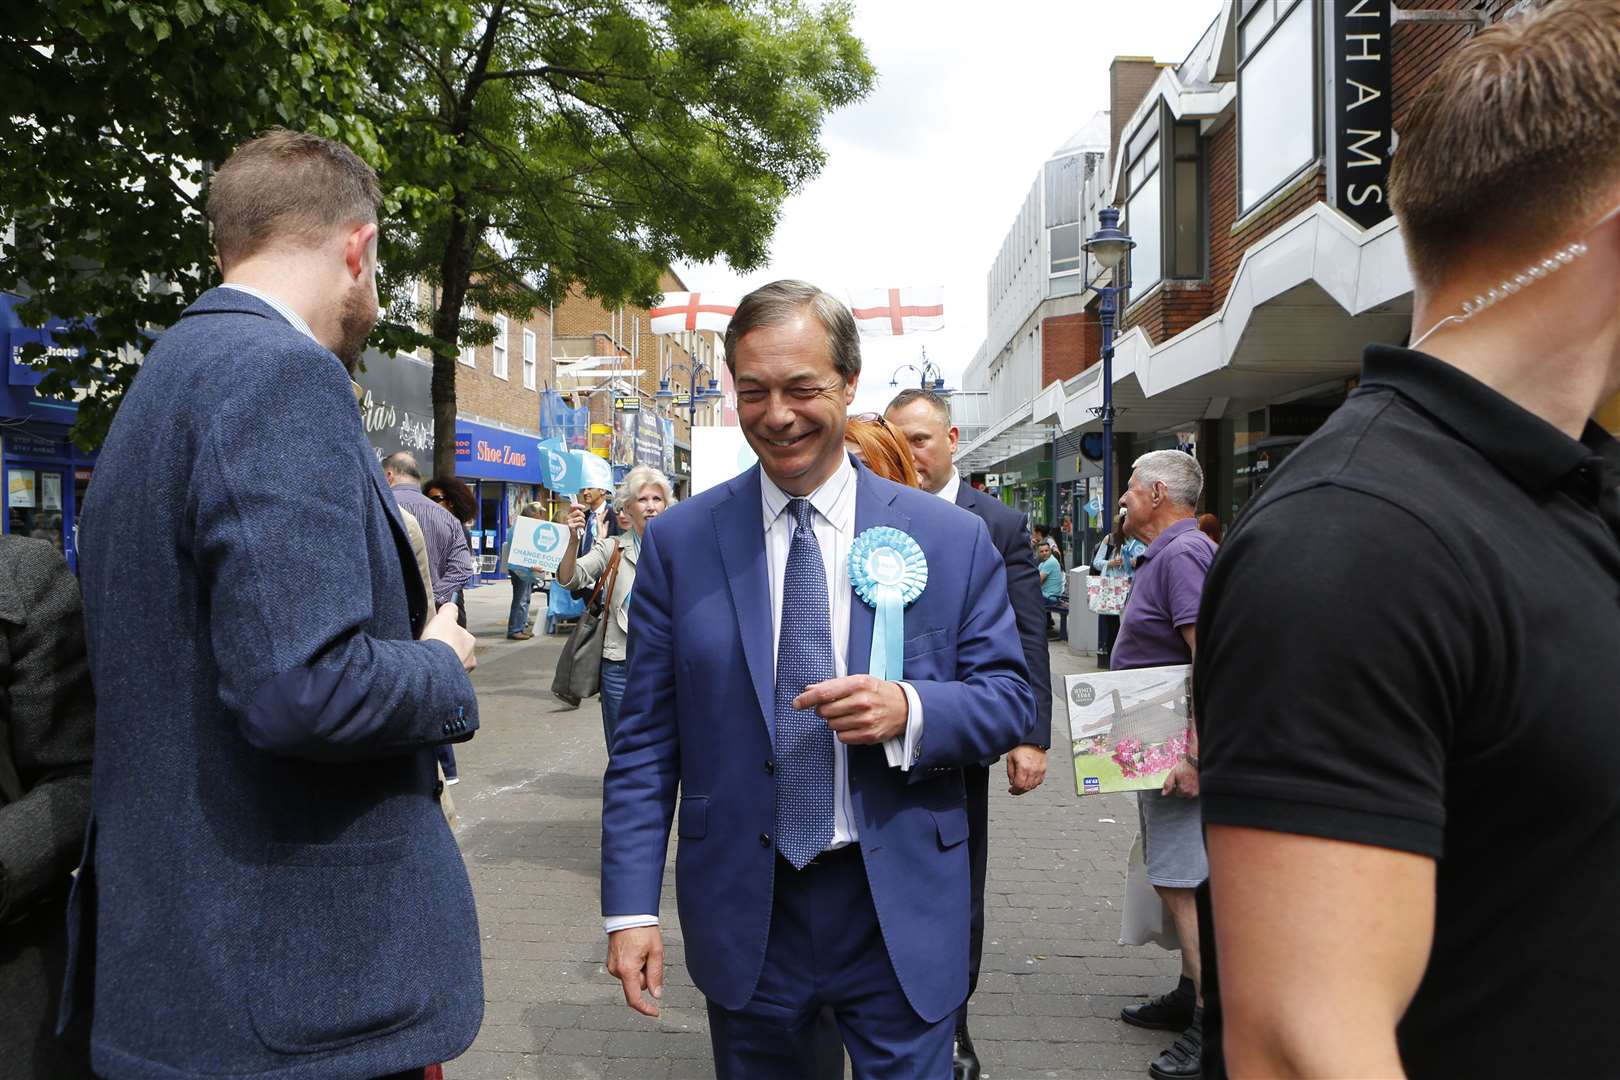 Nigel Farage visits Gravesend ahead of the European elections in 2019